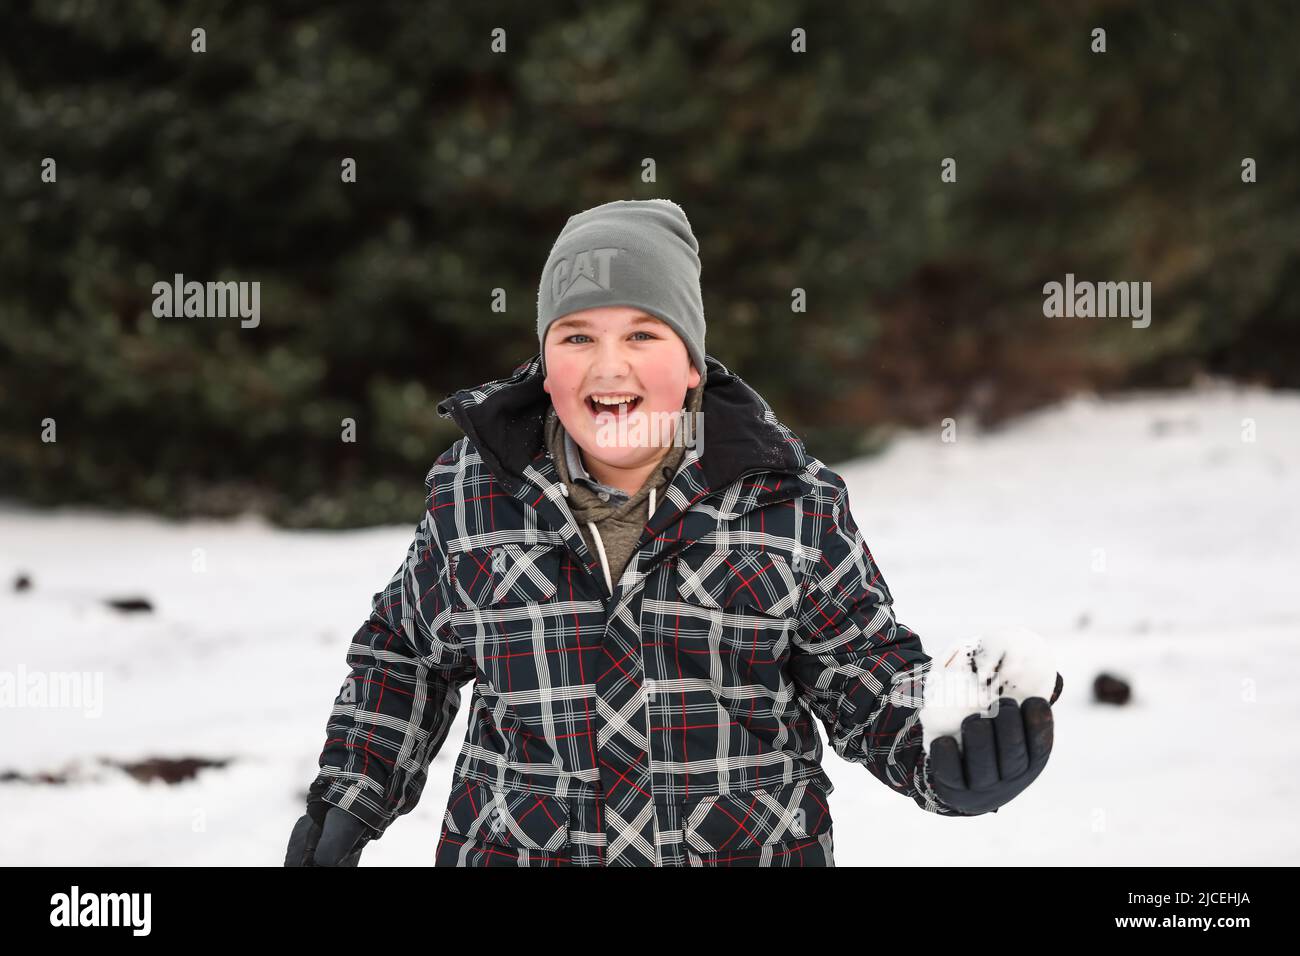 Young boy playing in snowy winter wonderland snowball fight Stock Photo